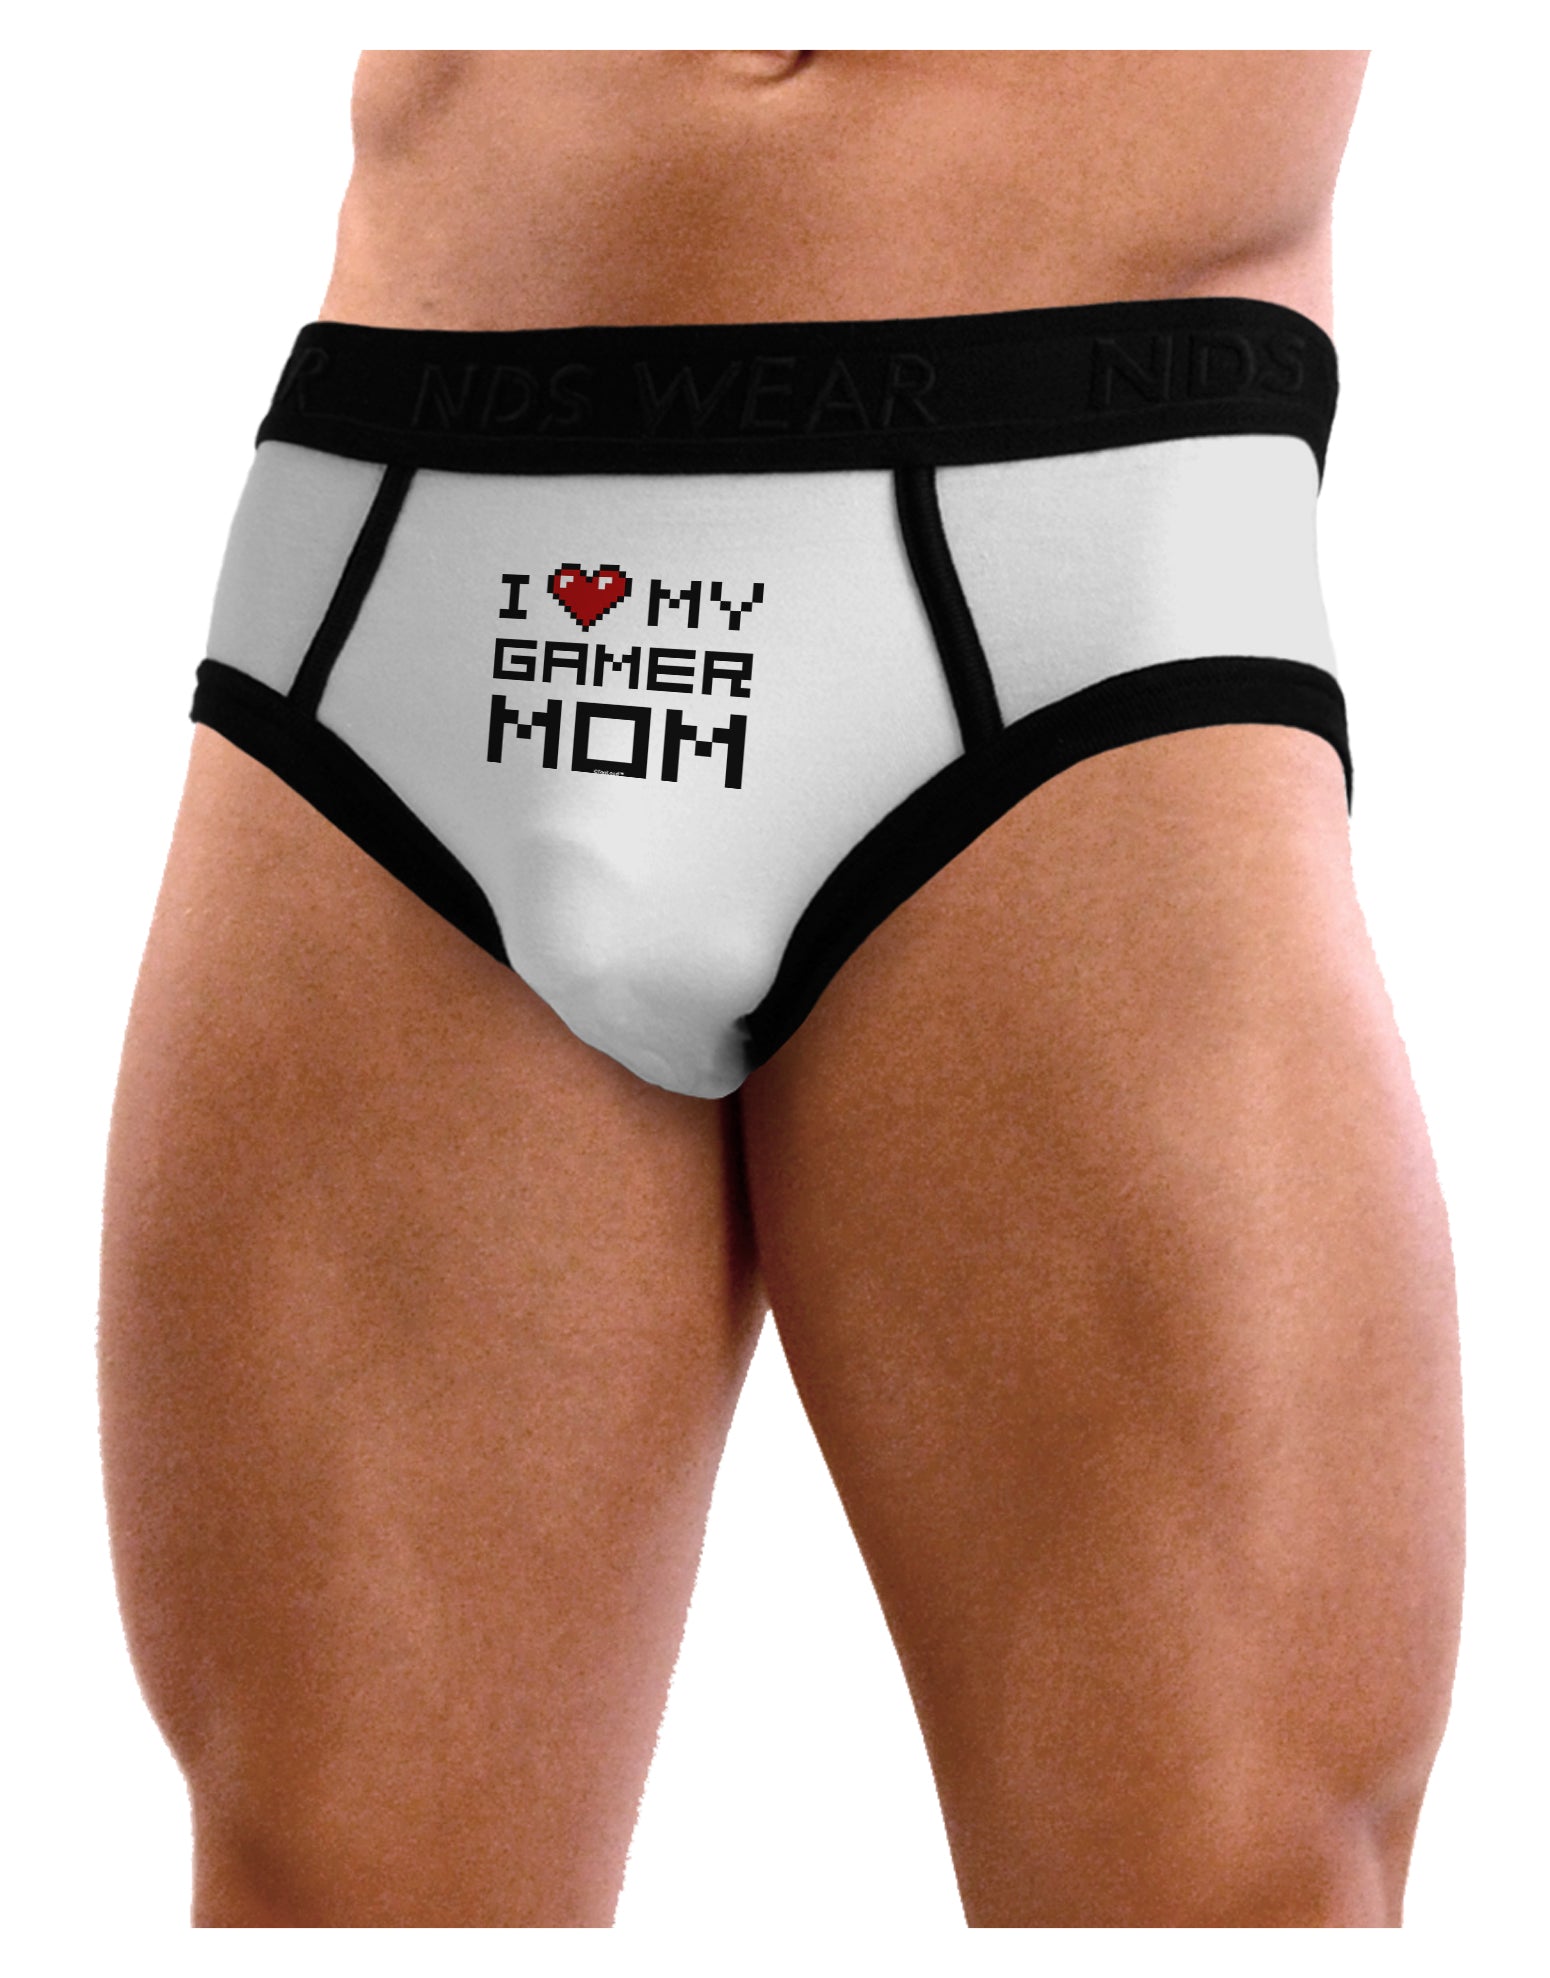 NDS Wear TooLoud Basketball Mom Jersey Mens Boxer Brief Underwear